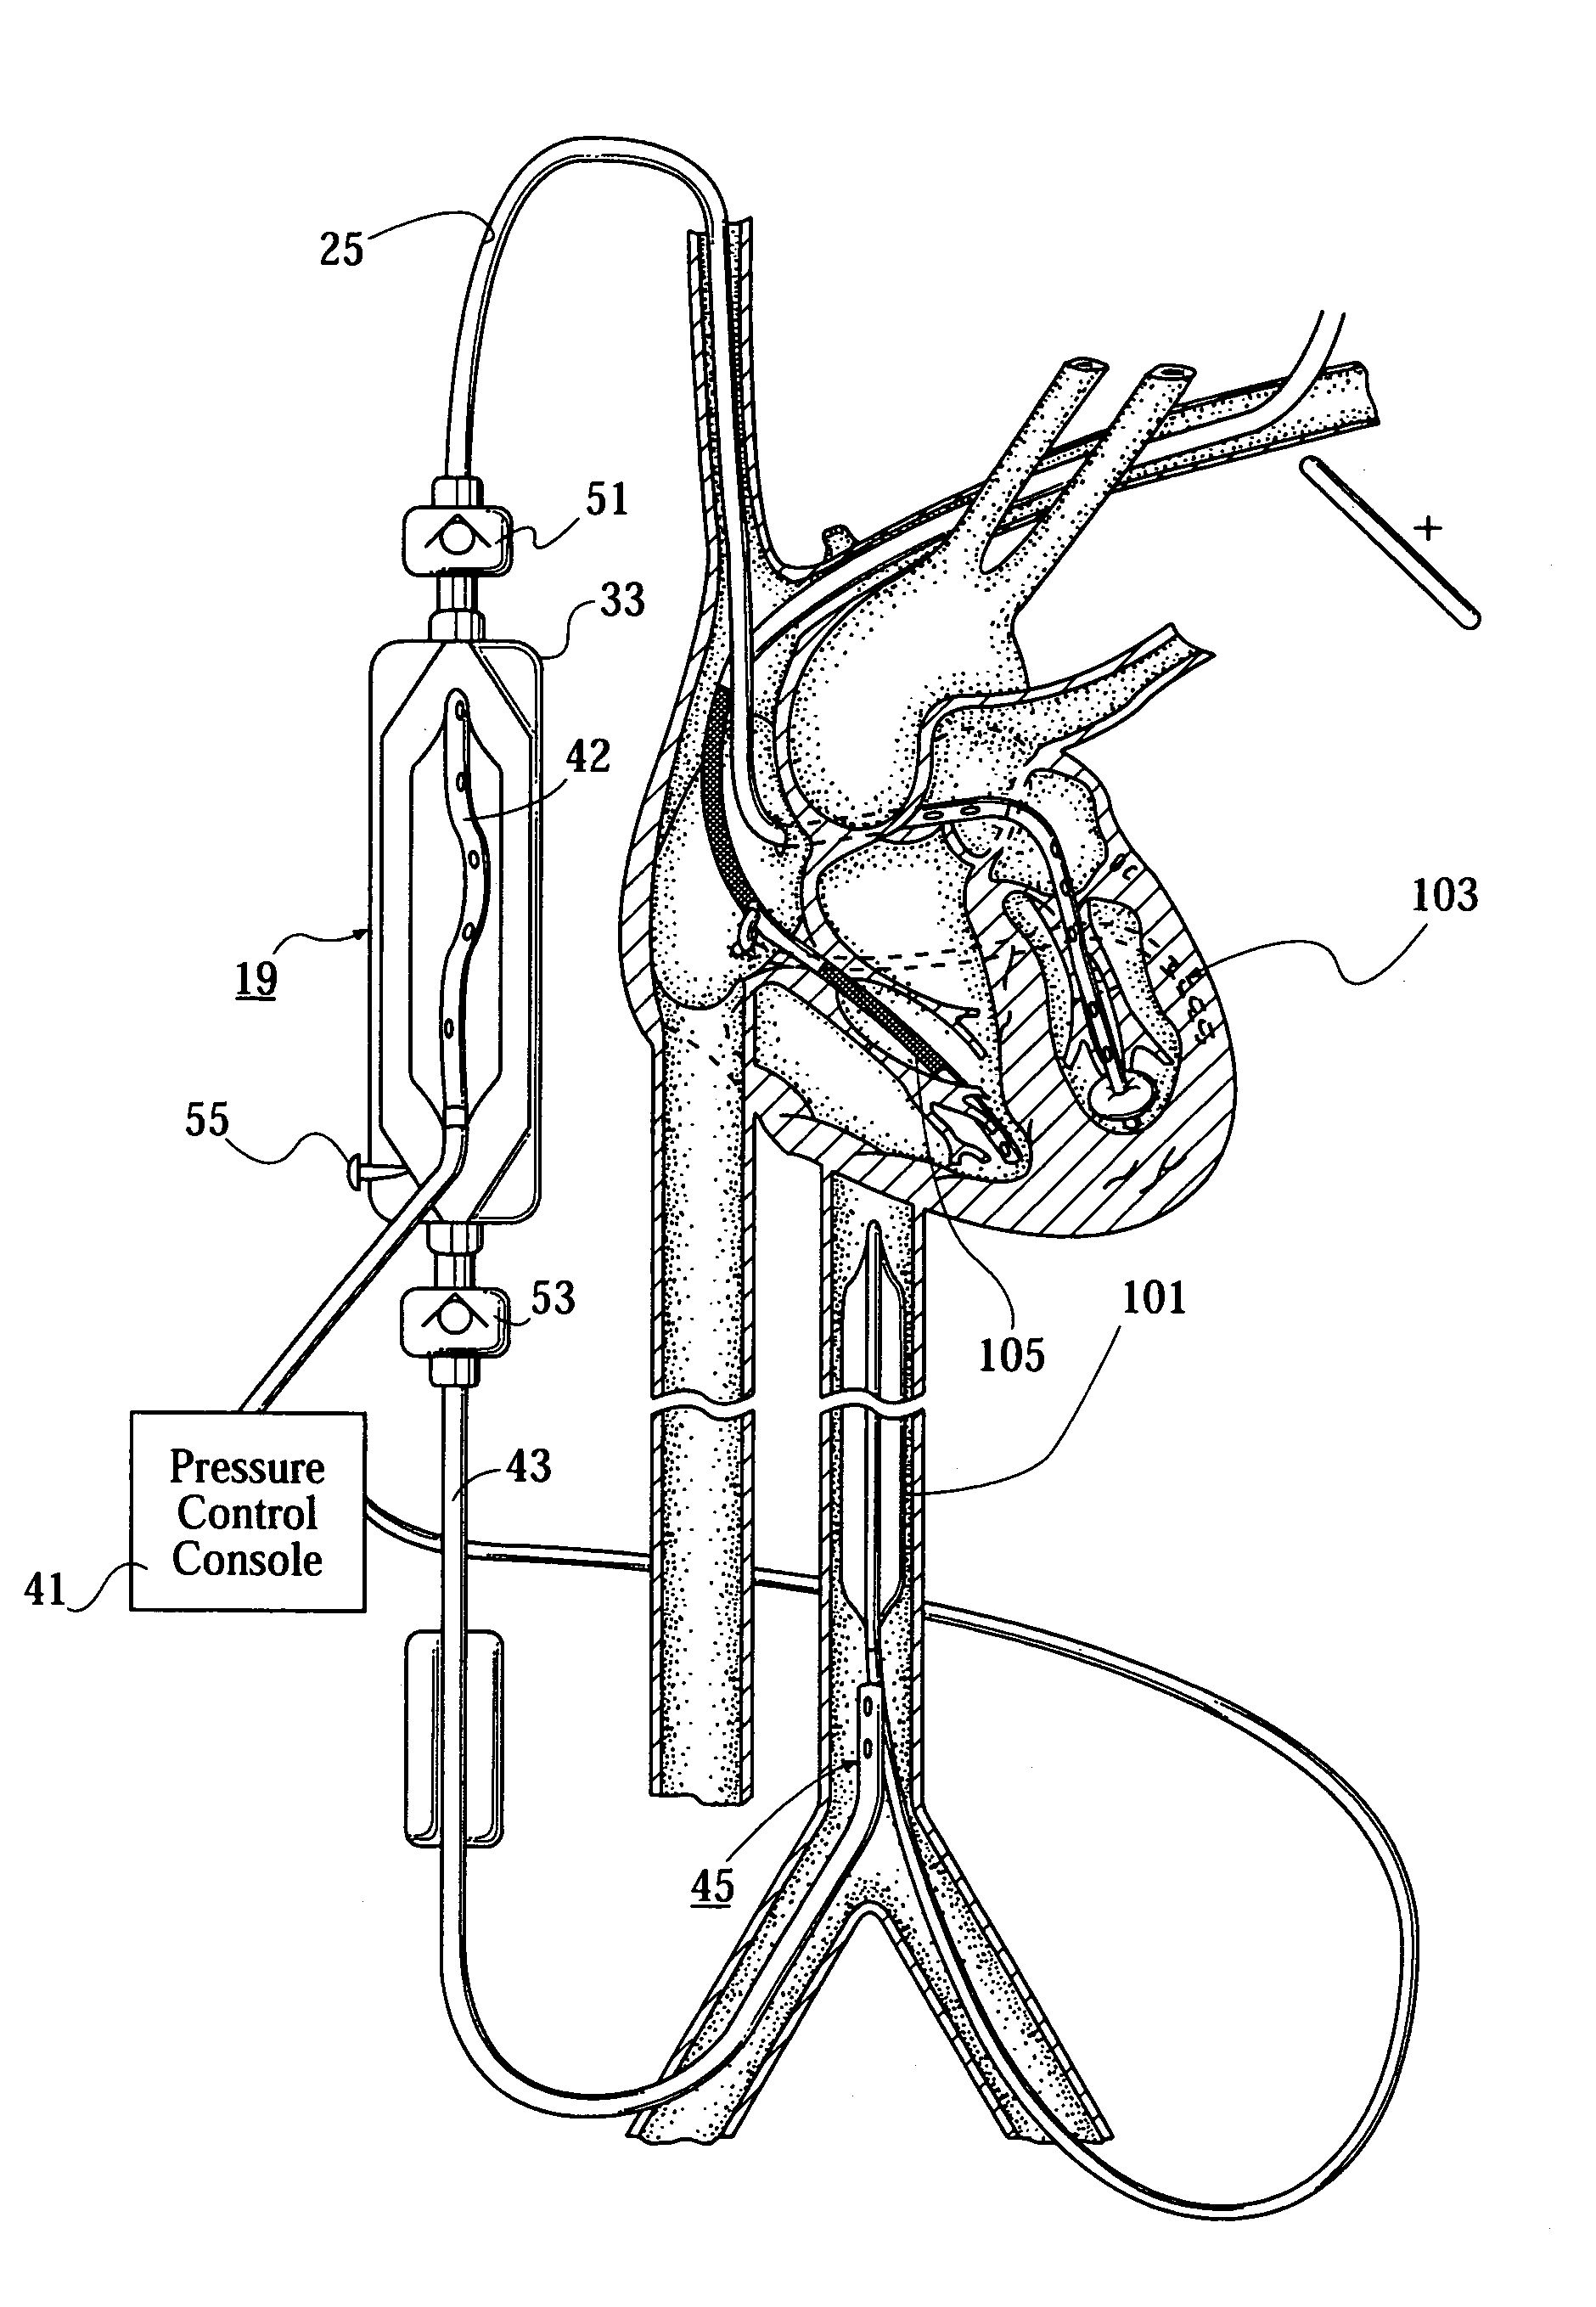 Minimally invasive ventricular assist technology and method